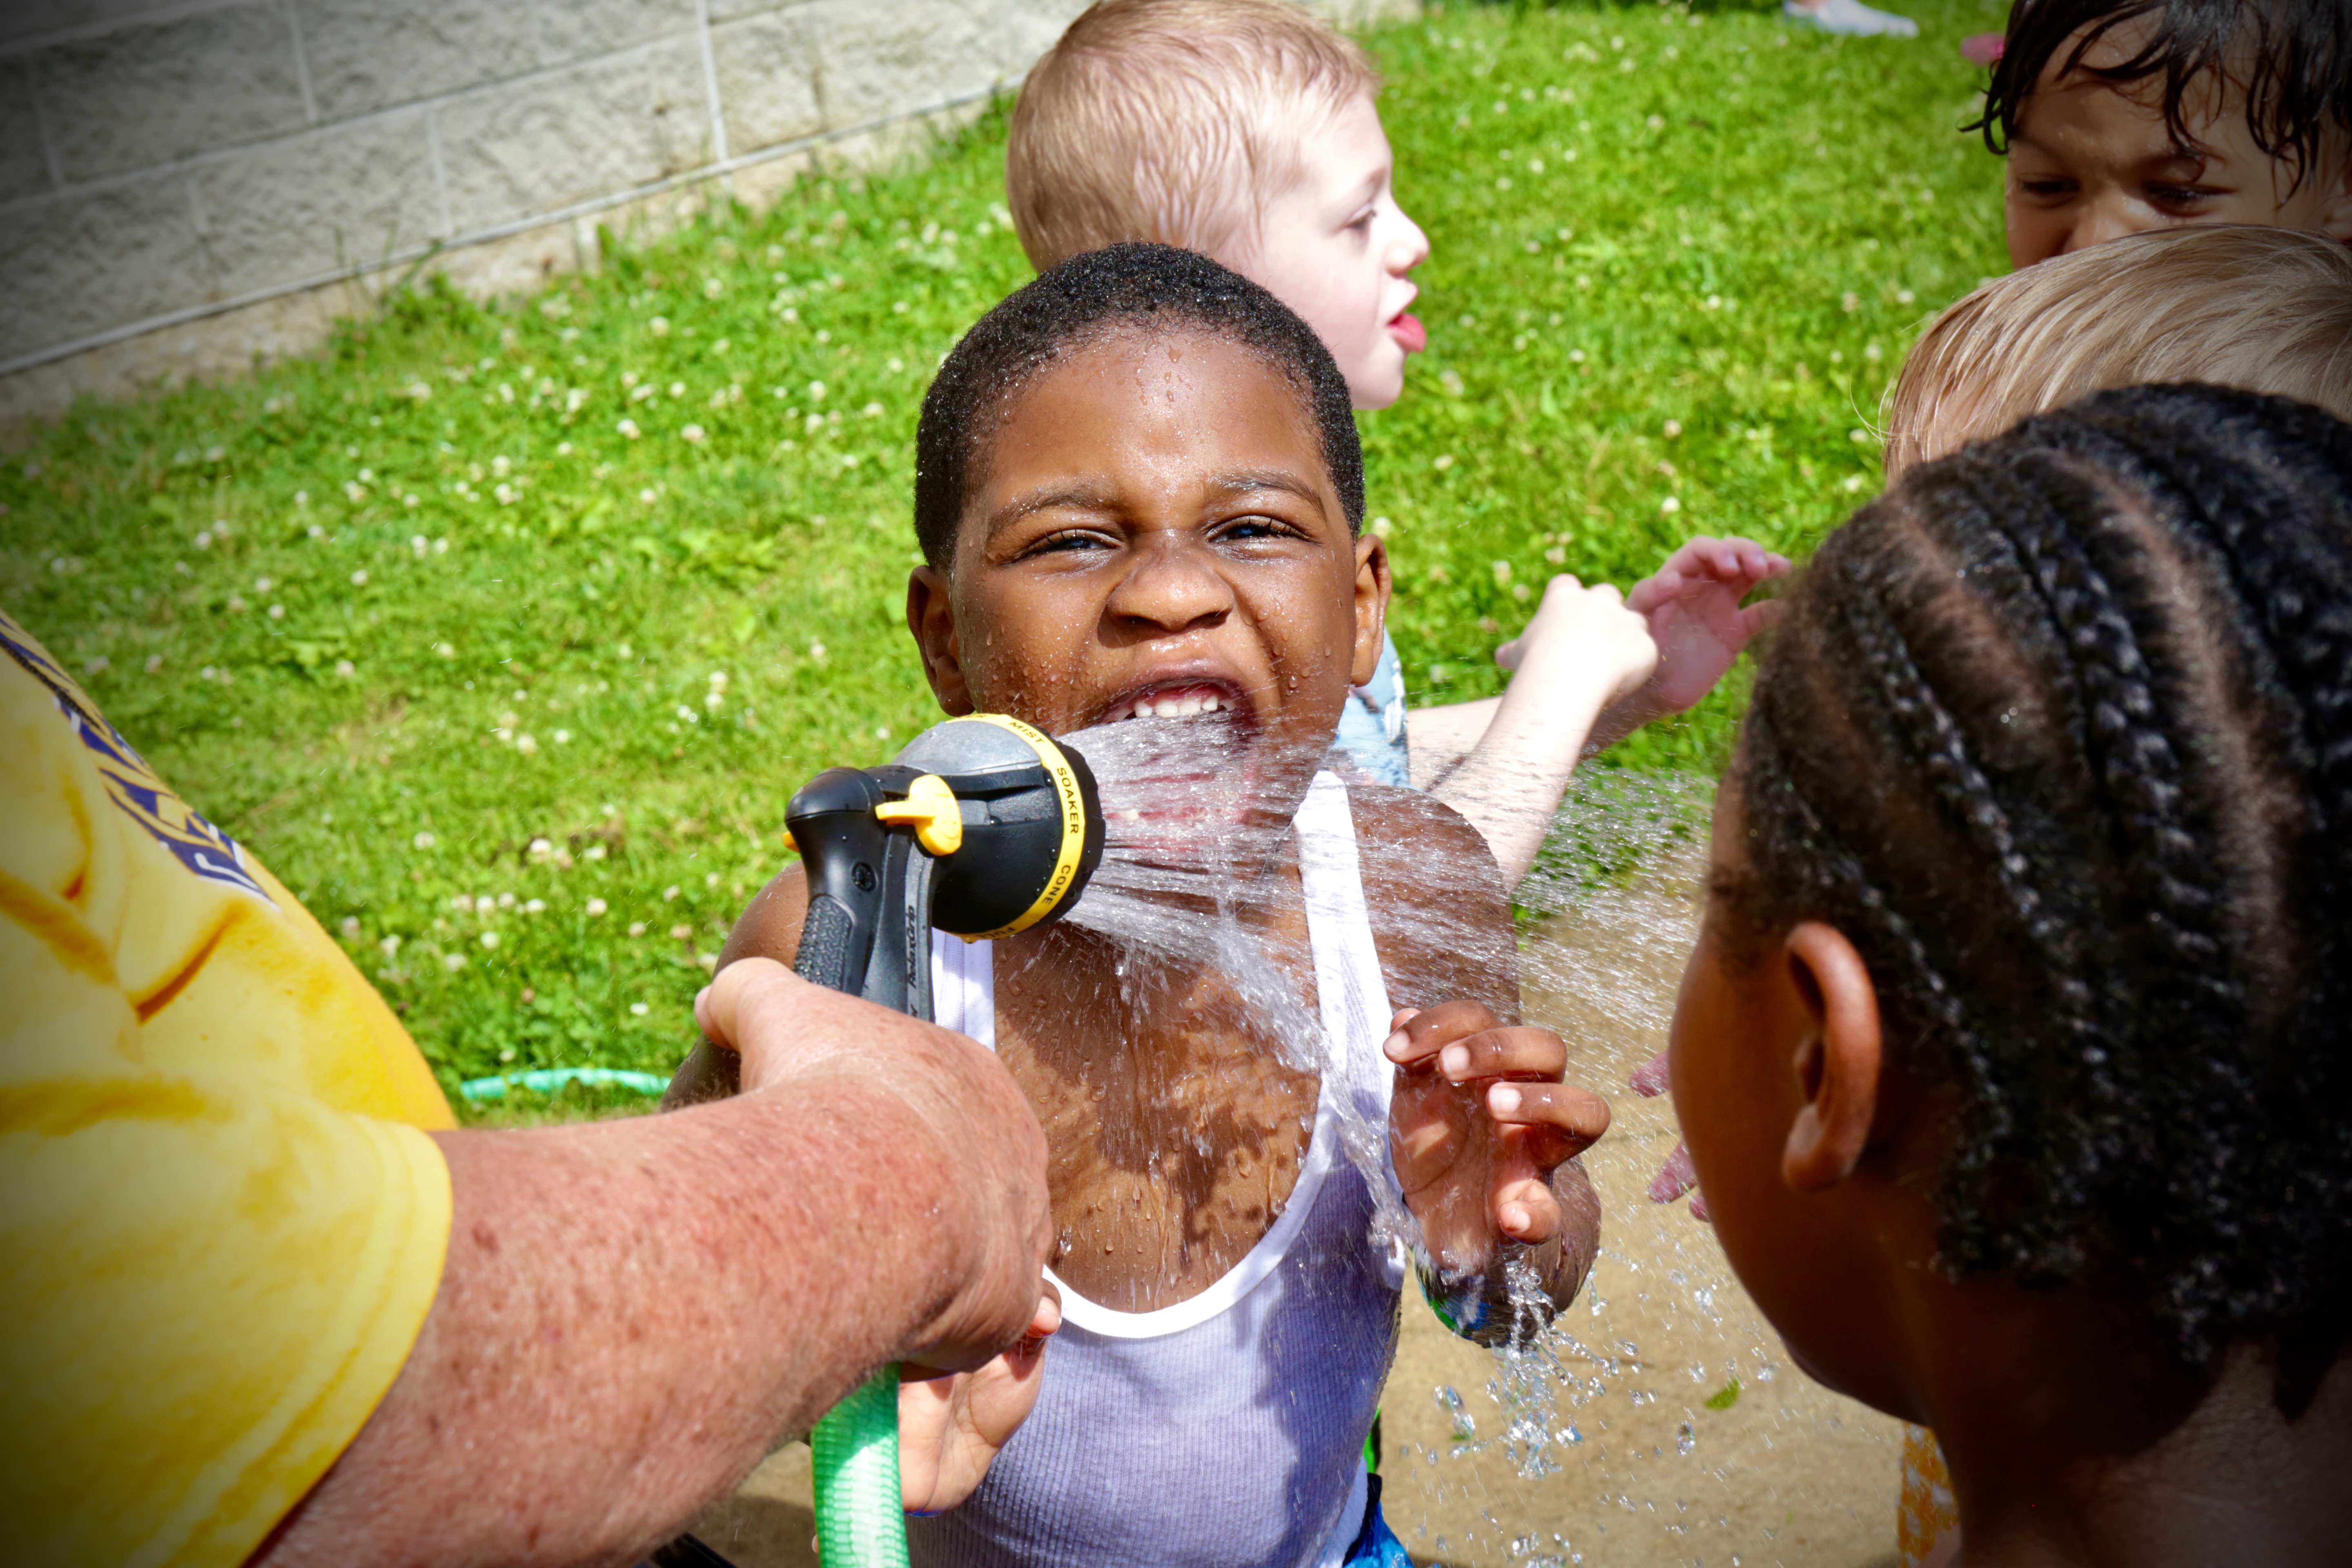 A Clark Preschool student enjoys a drink from a garden hose during outside playtime